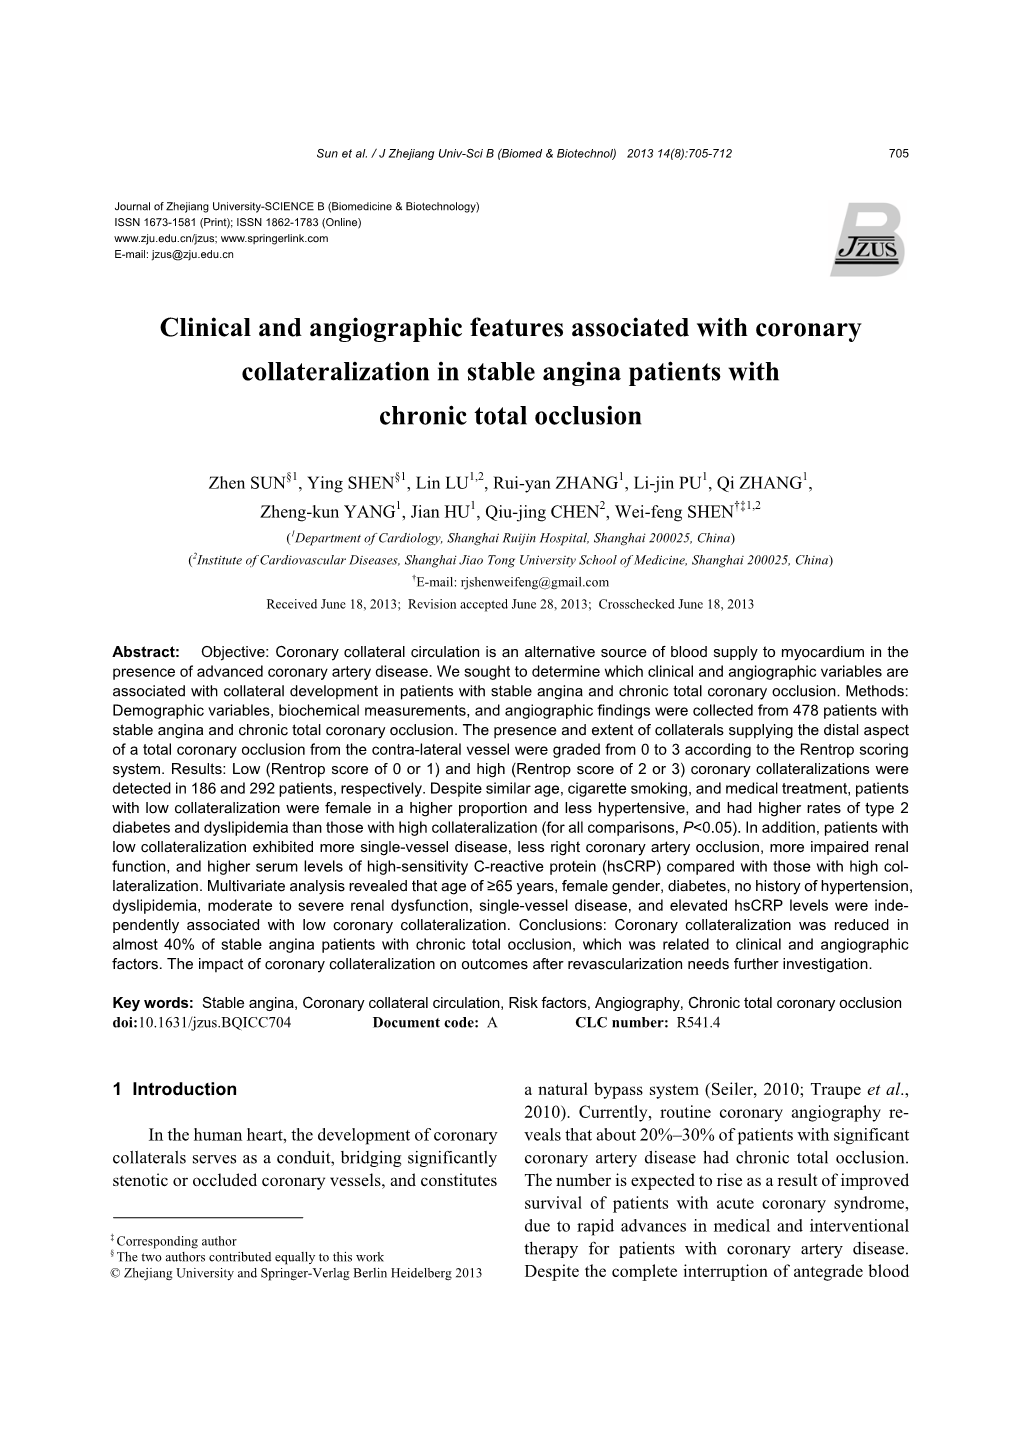 Clinical and Angiographic Features Associated with Coronary Collateralization in Stable Angina Patients with Chronic Total Occlusion